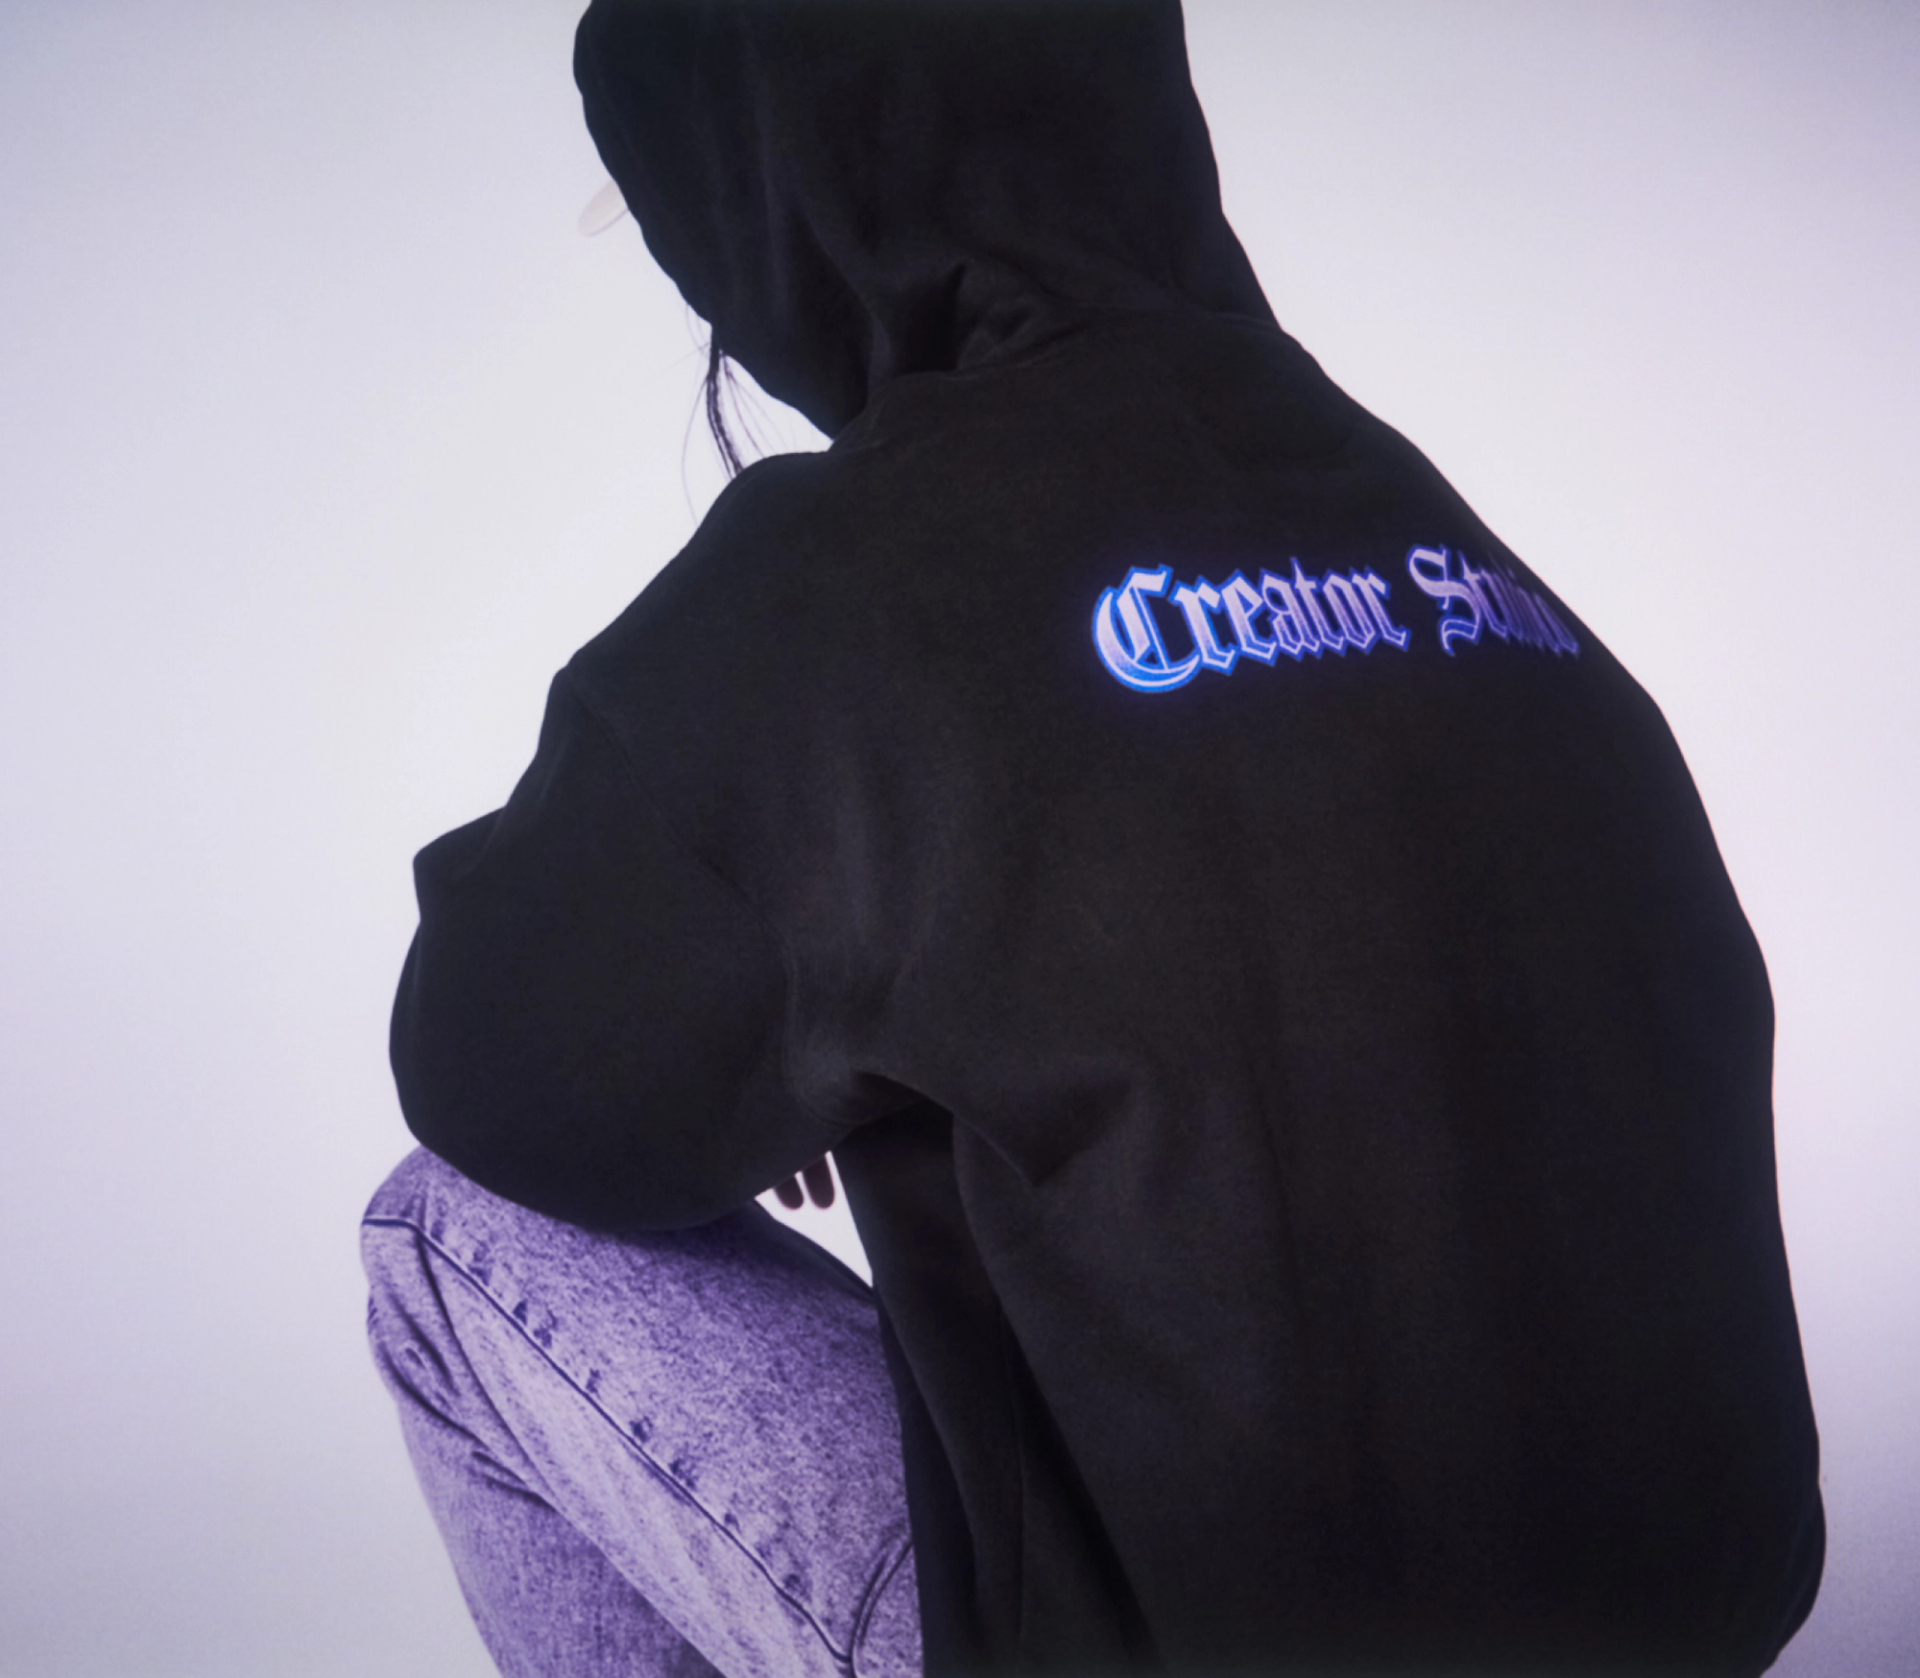 A model wearing a black hoodie with Creator Studio print on the back